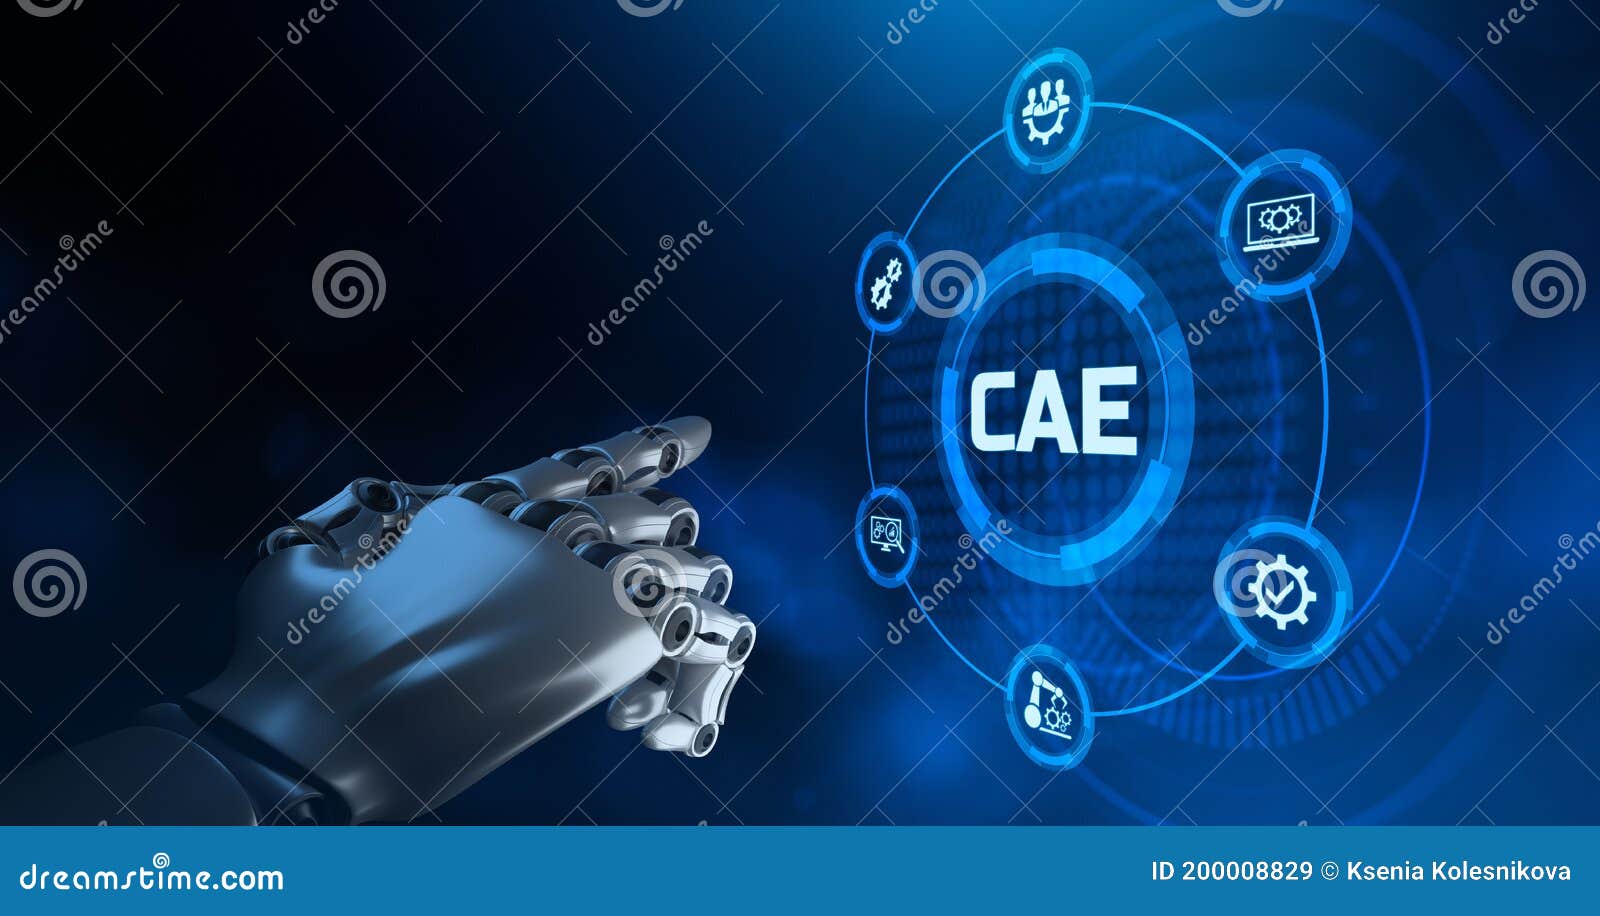 cae computer-aided engineering cad system. technology concept on screen.